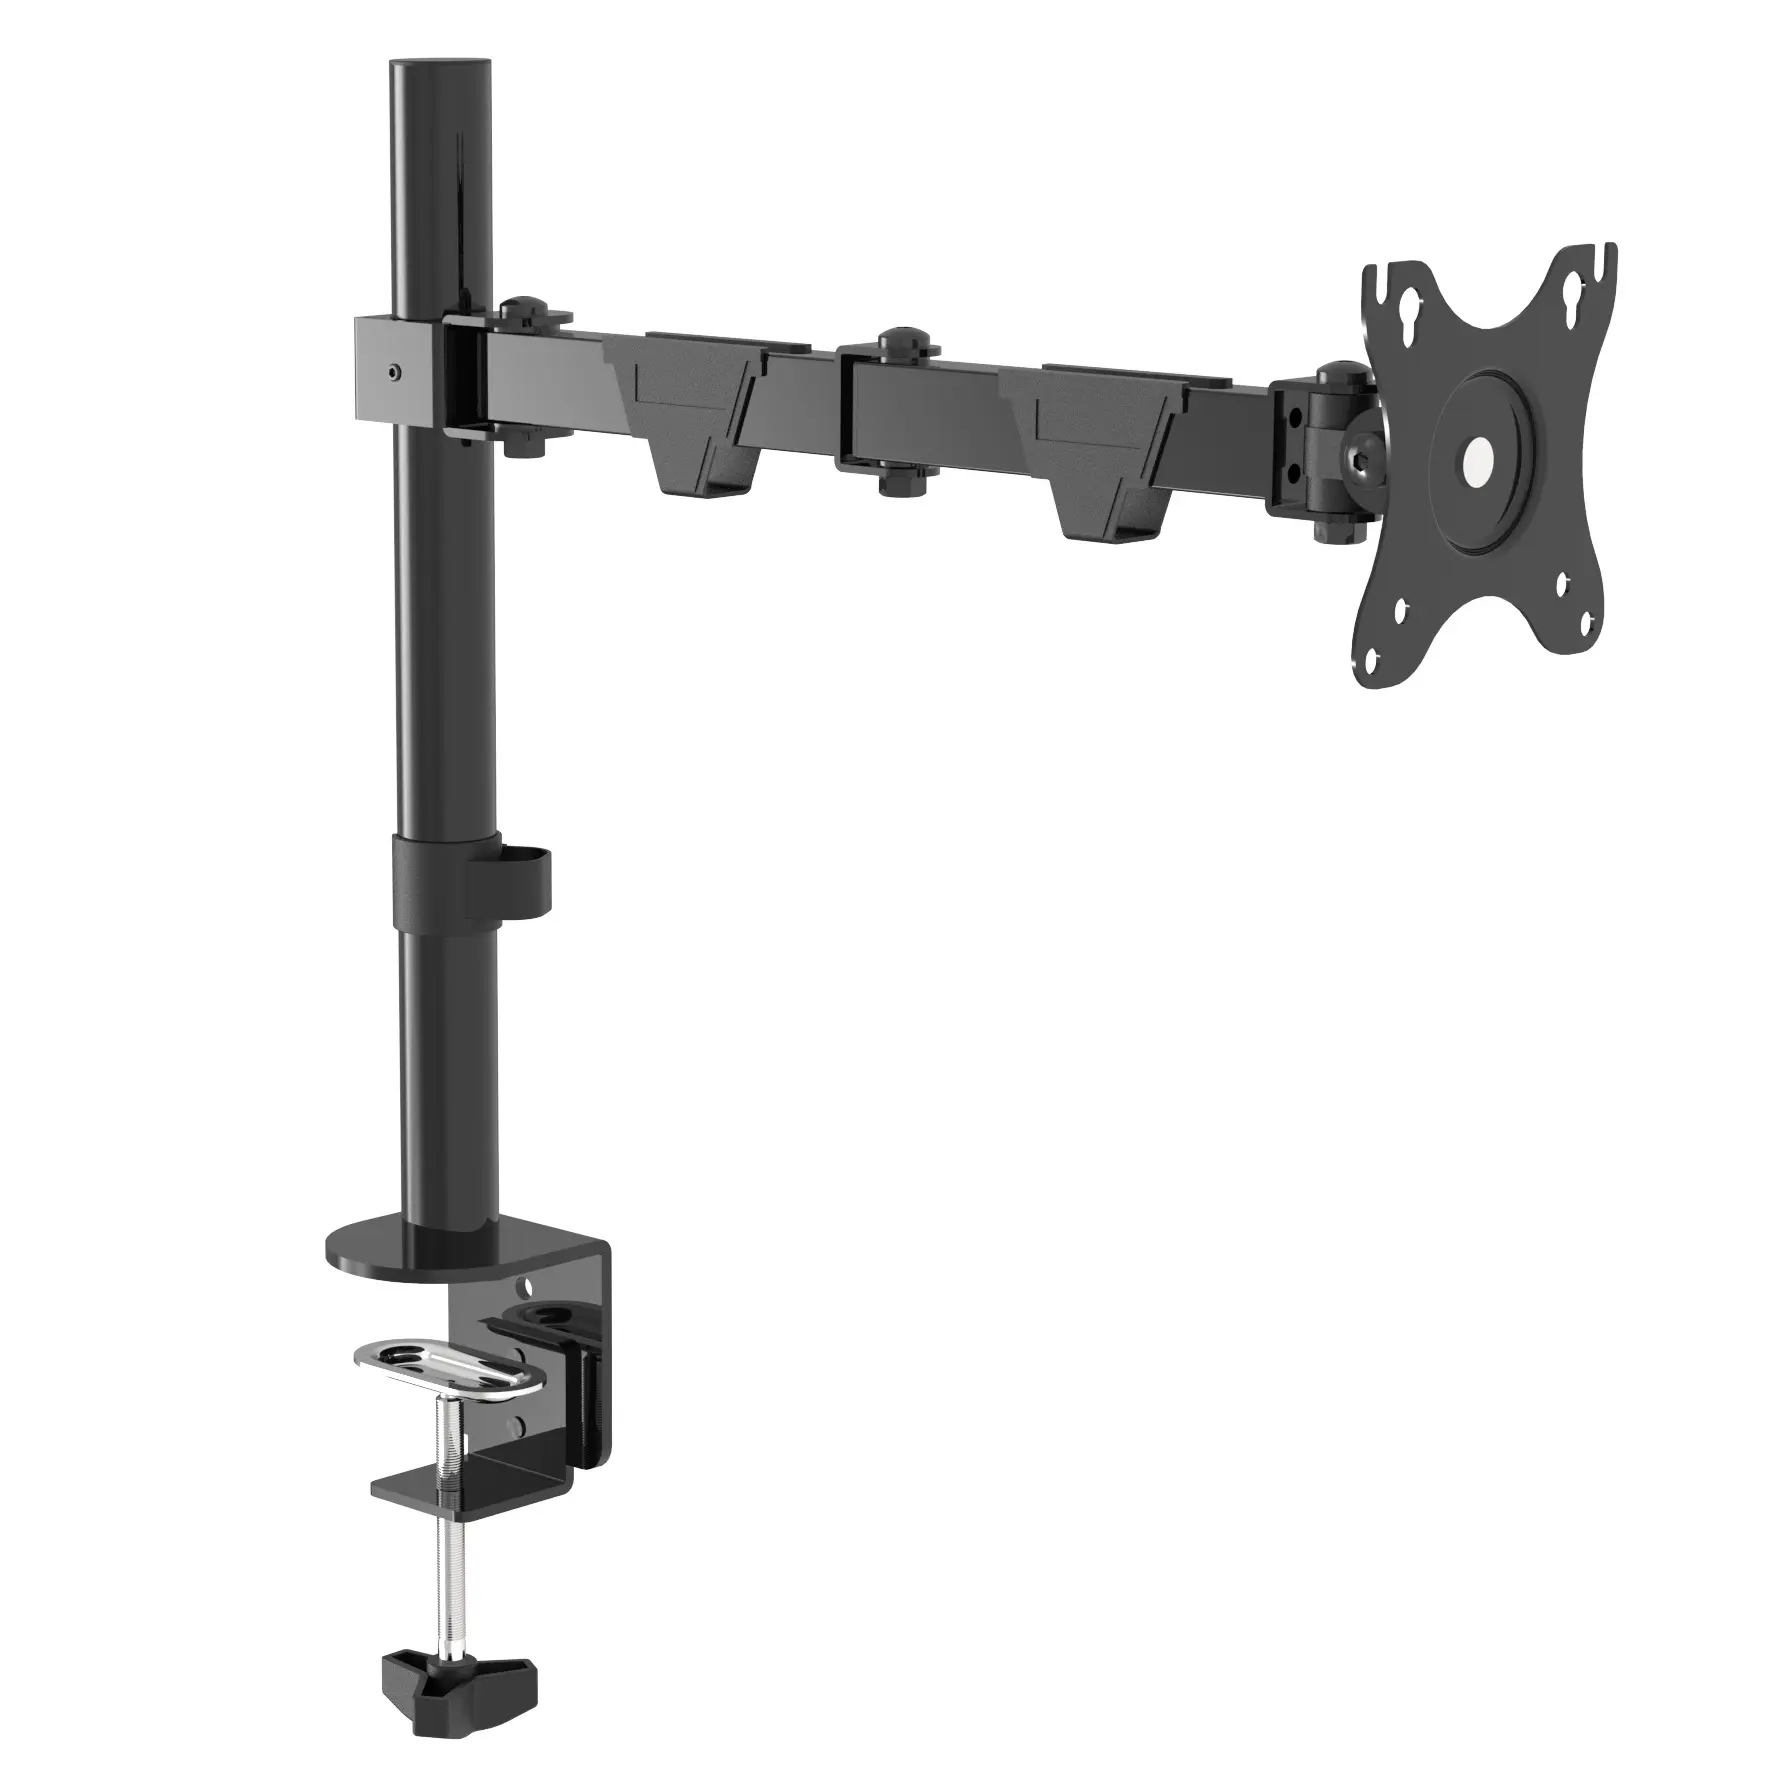 fit 32" inch vesa screen Single height adjustable steel plastic 360 rotatable laptop arm computer riser monitor mount stand